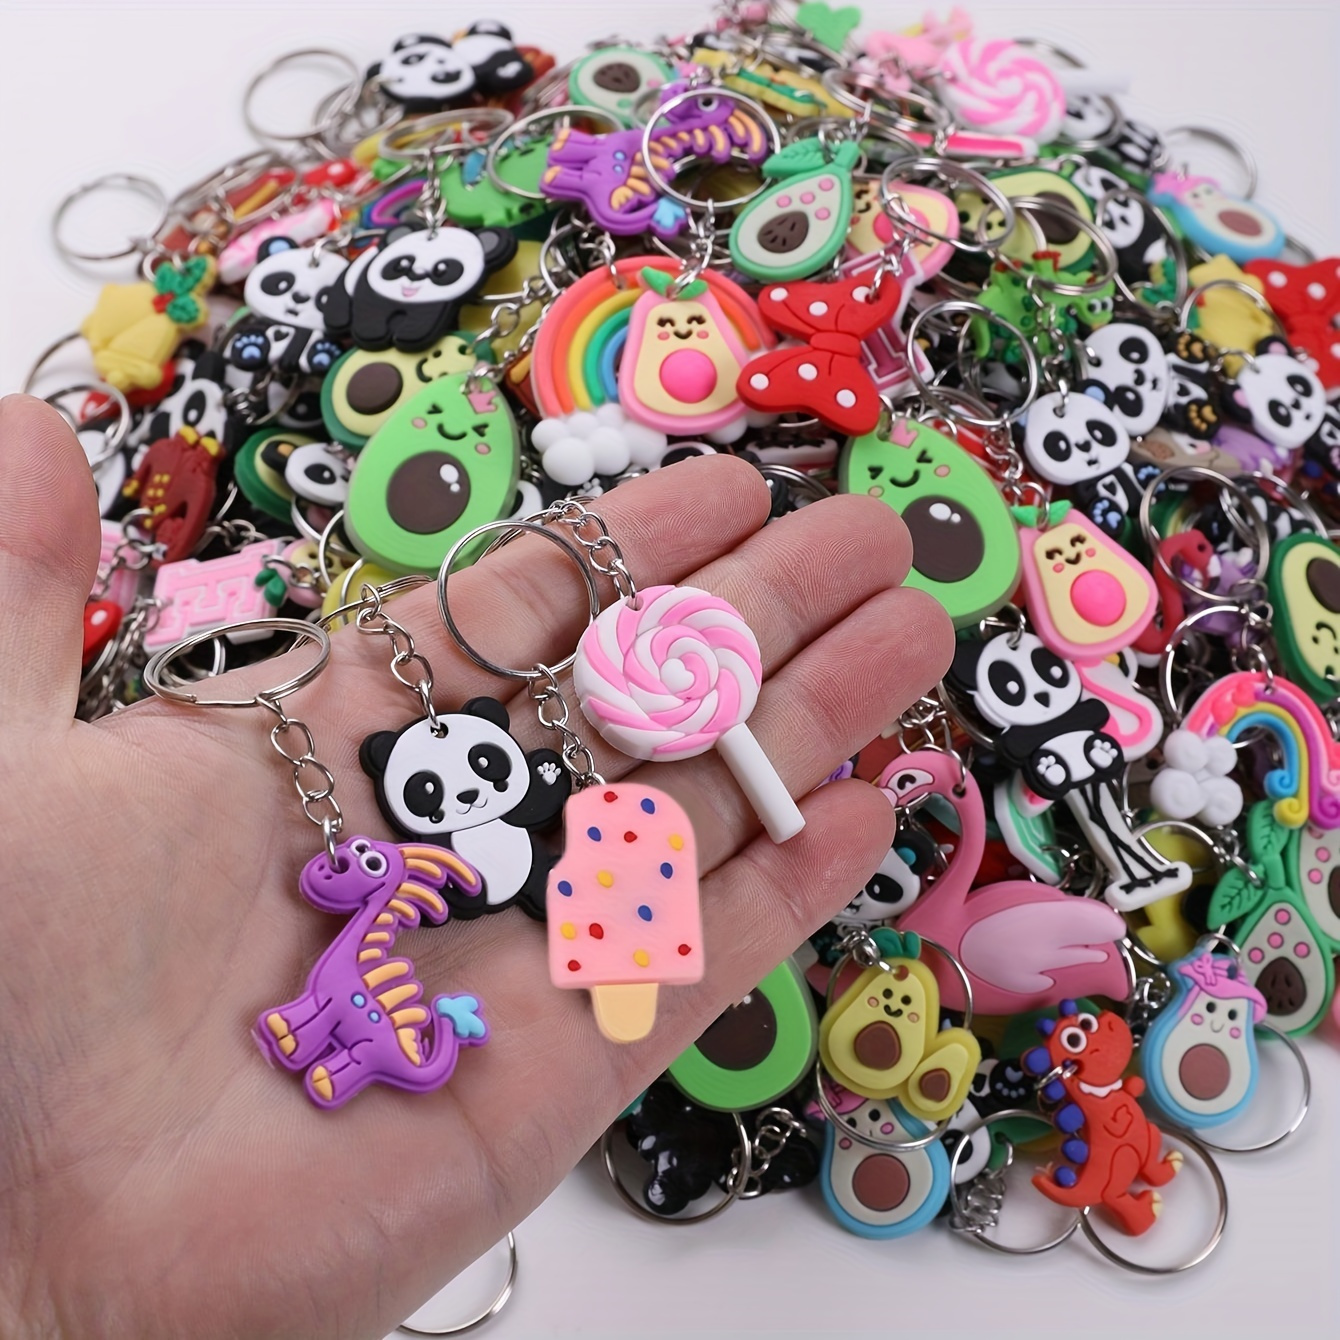 

Assorted Cartoon Keychains, Pvc Panda & Various Designs, Ladies Bag Accessories, Random Mix Anime Style Key Rings, Irregular Shapes, Cute Diy Charms For Keys And Bags